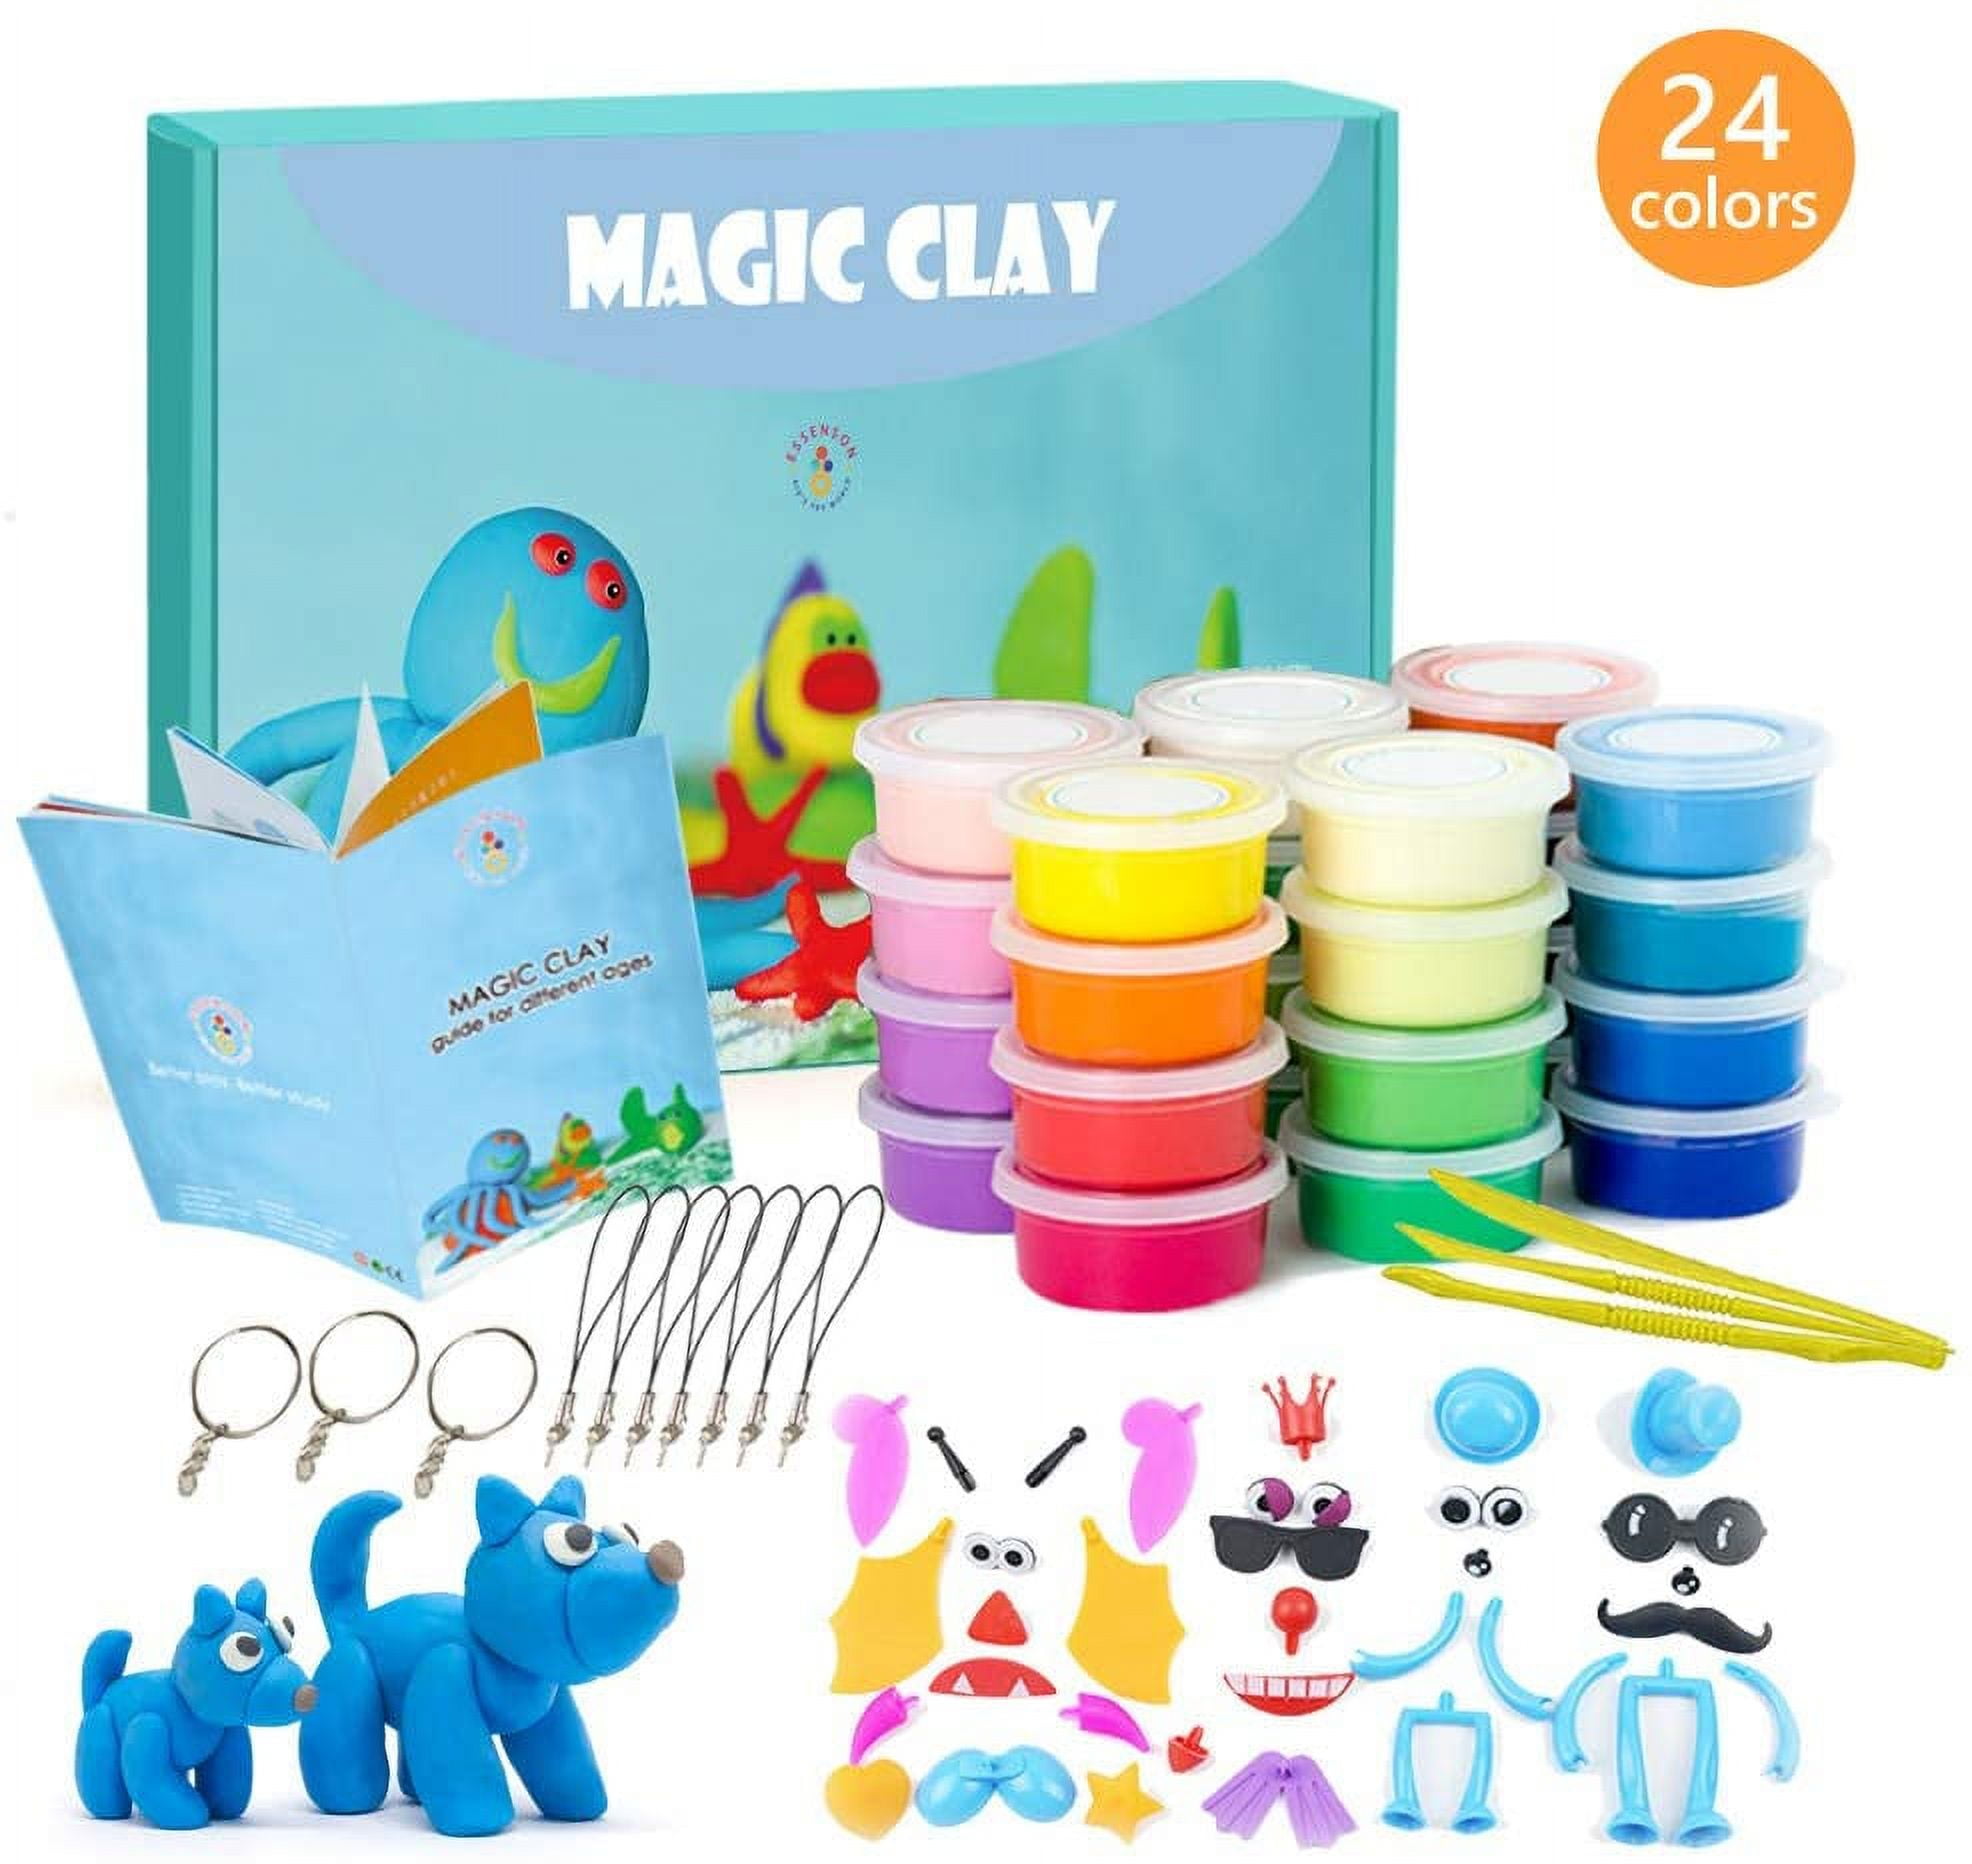 Modeling Clay - 48 Colors Air Dry Clay, DIY Molding Magic Clay for